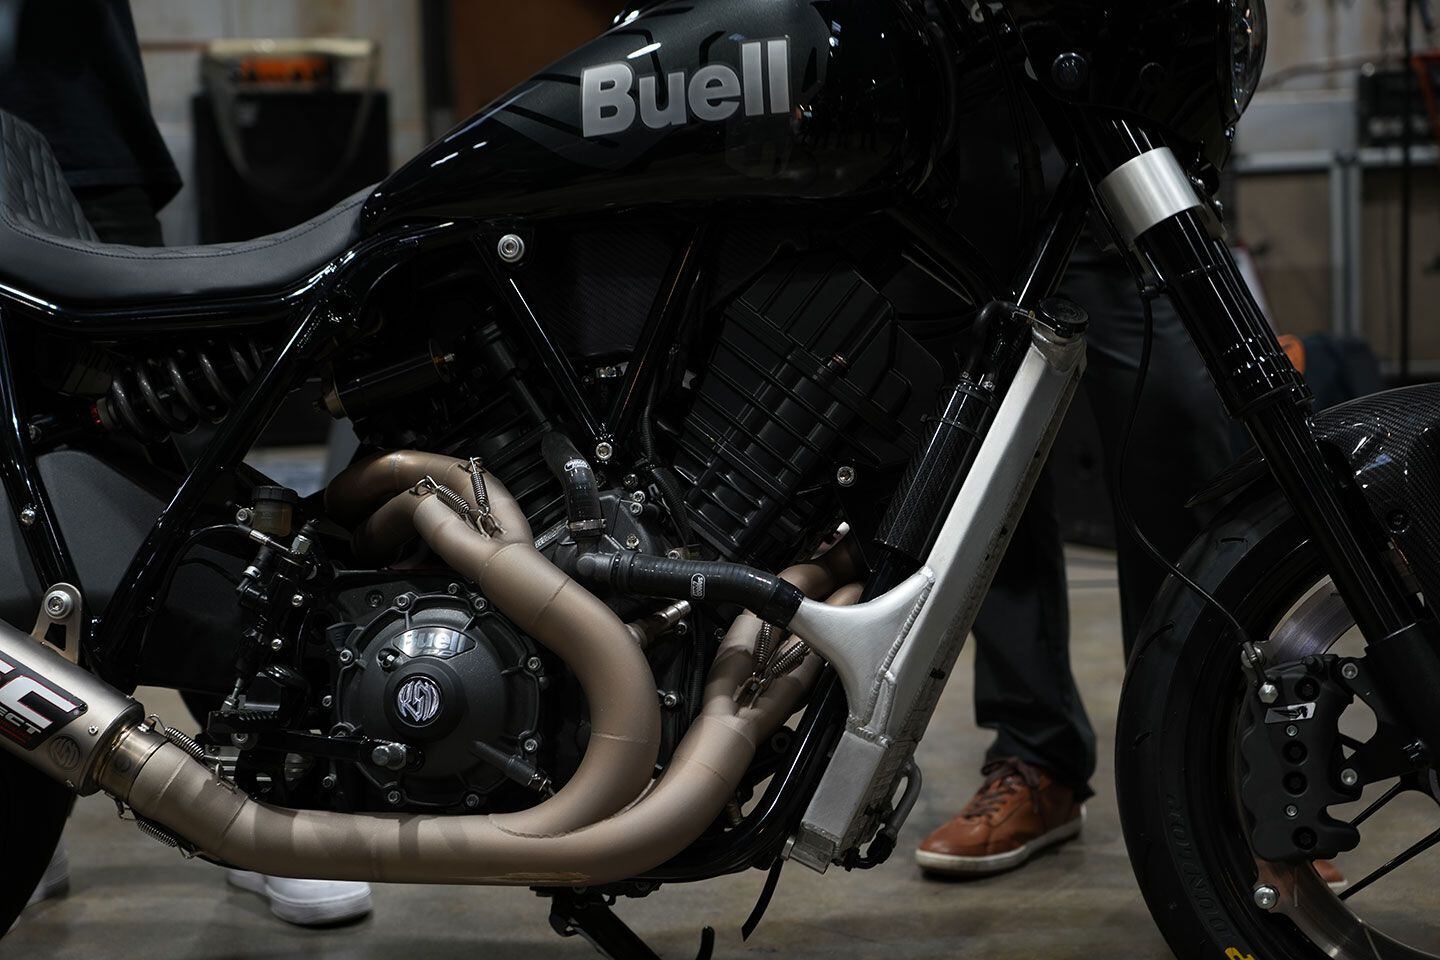 The Super Cruiser is powered by Buell Motorcycle’s existing 1,190cc liquid-cooled V-twin. Buell says this engine is good for 175 hp at the crankshaft.